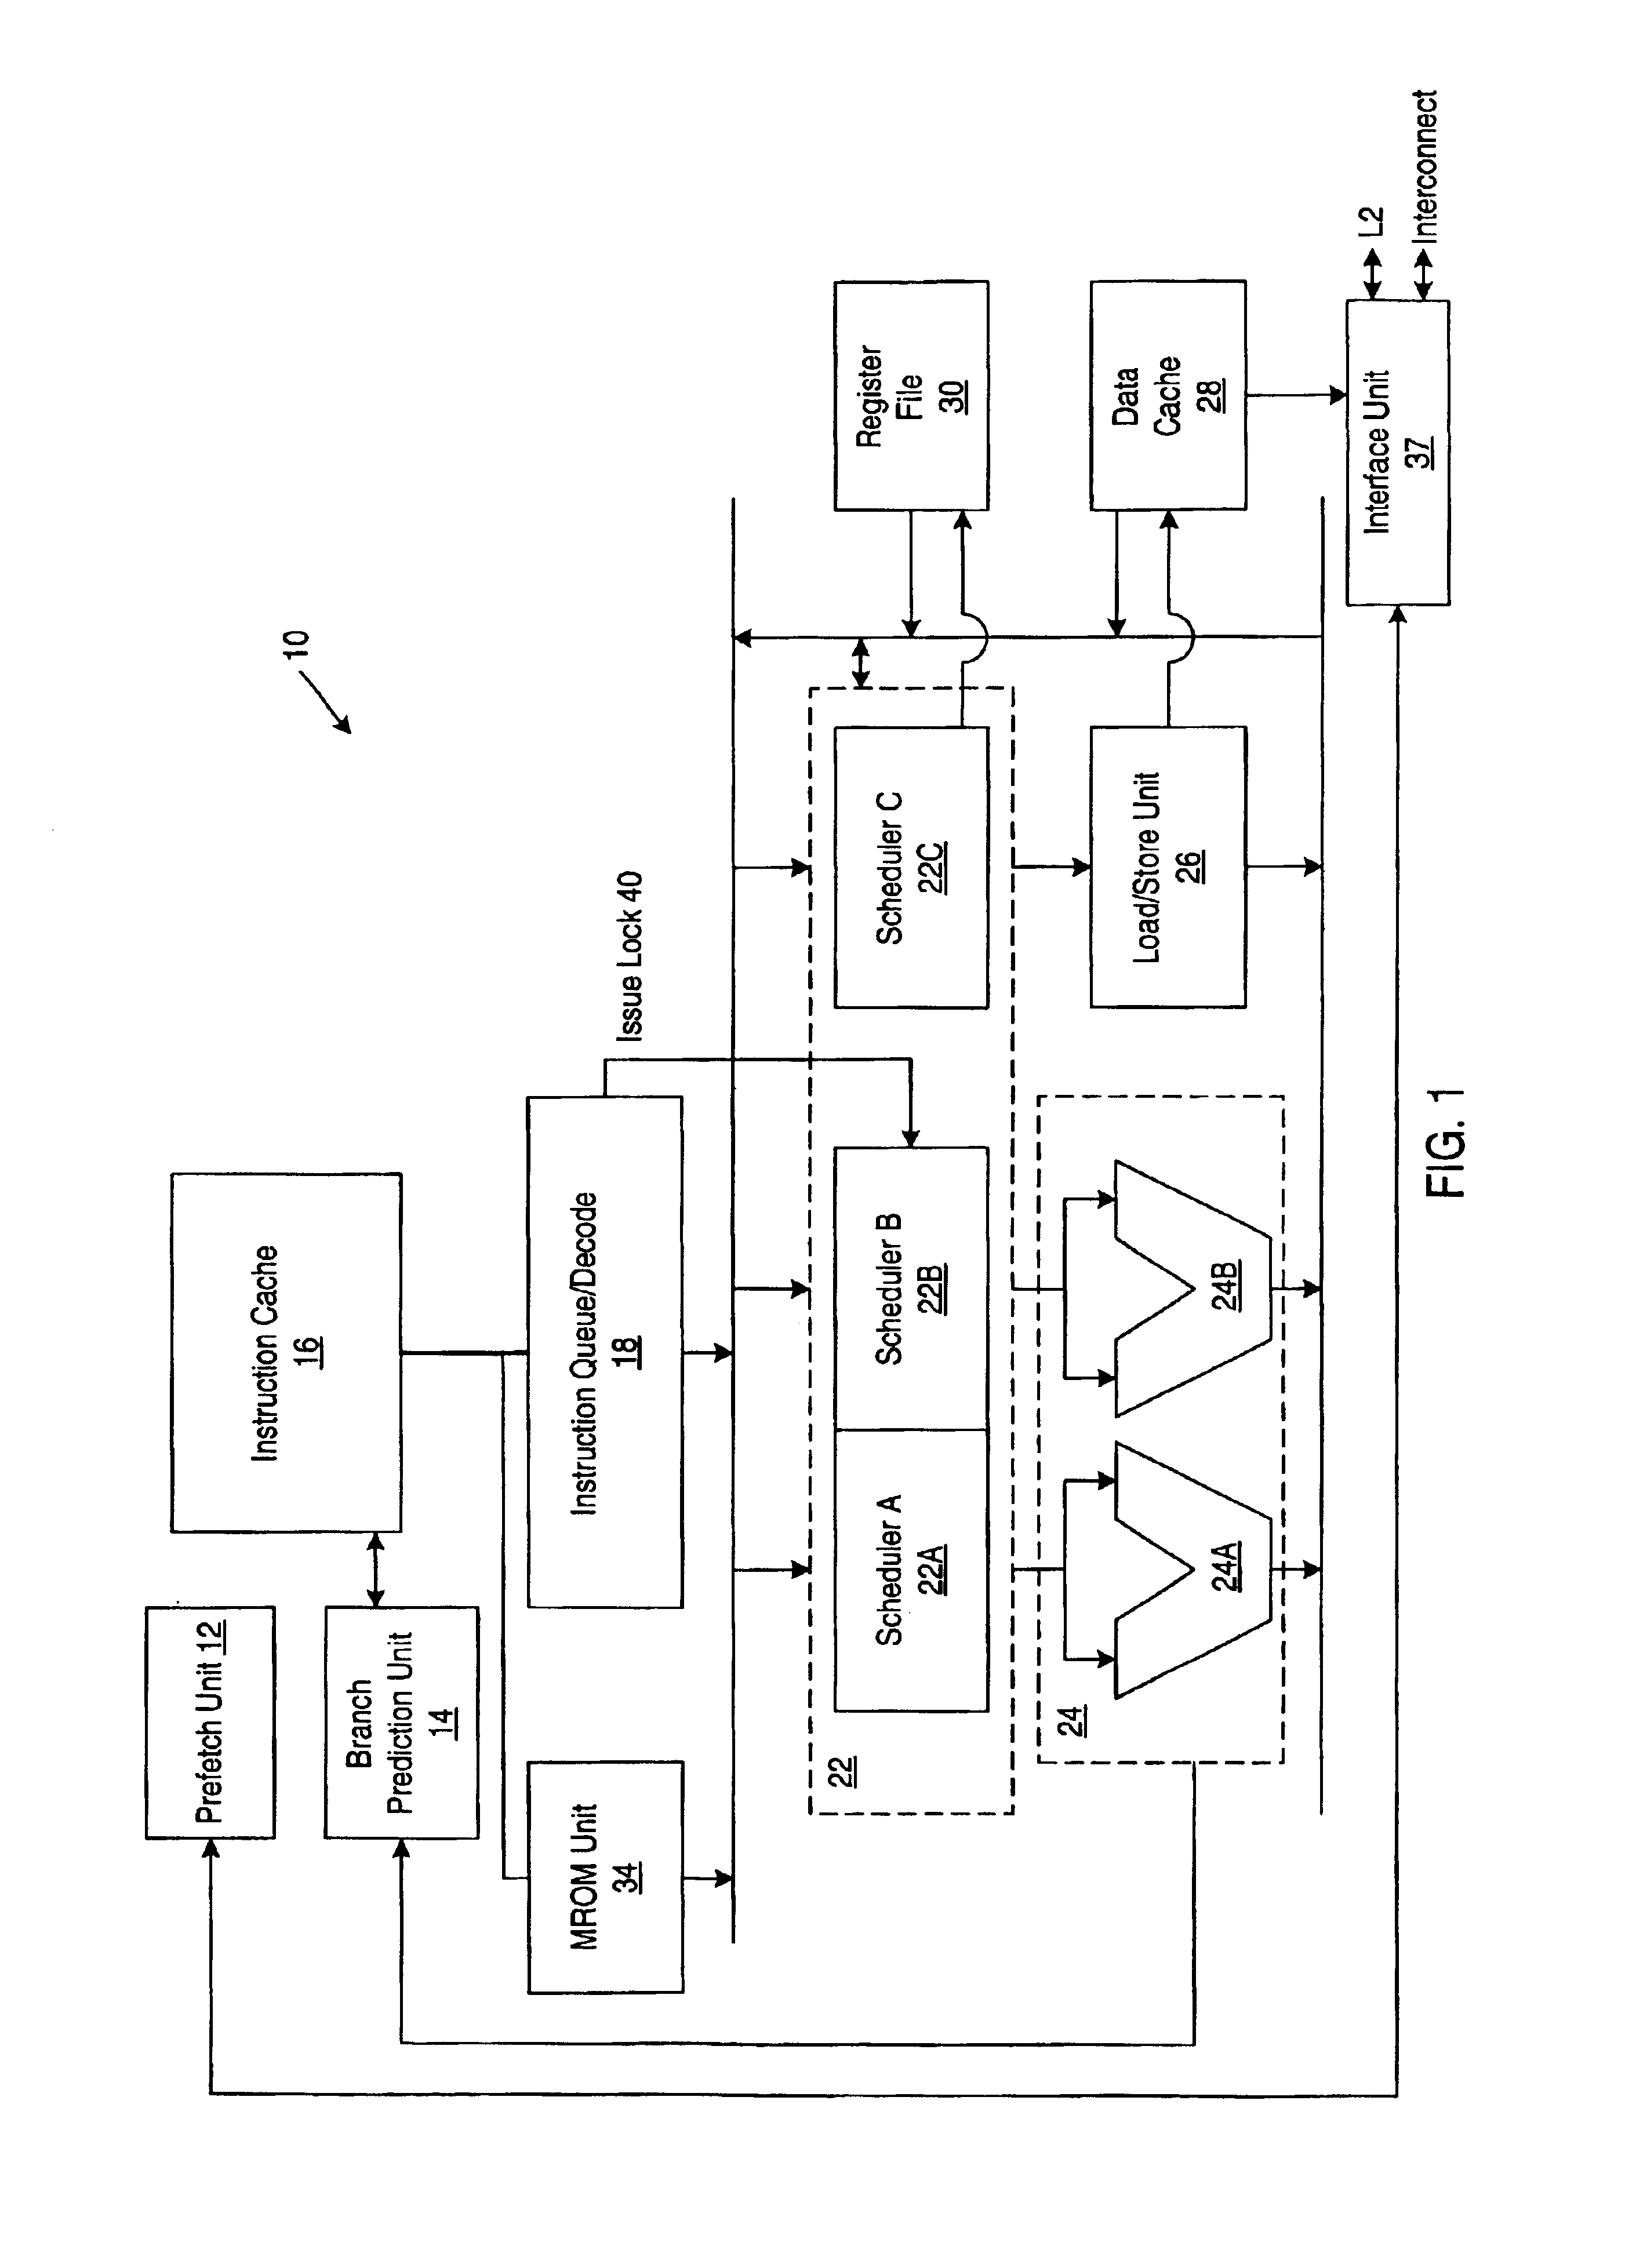 Apparatus and method for independently schedulable functional units with issue lock mechanism in a processor